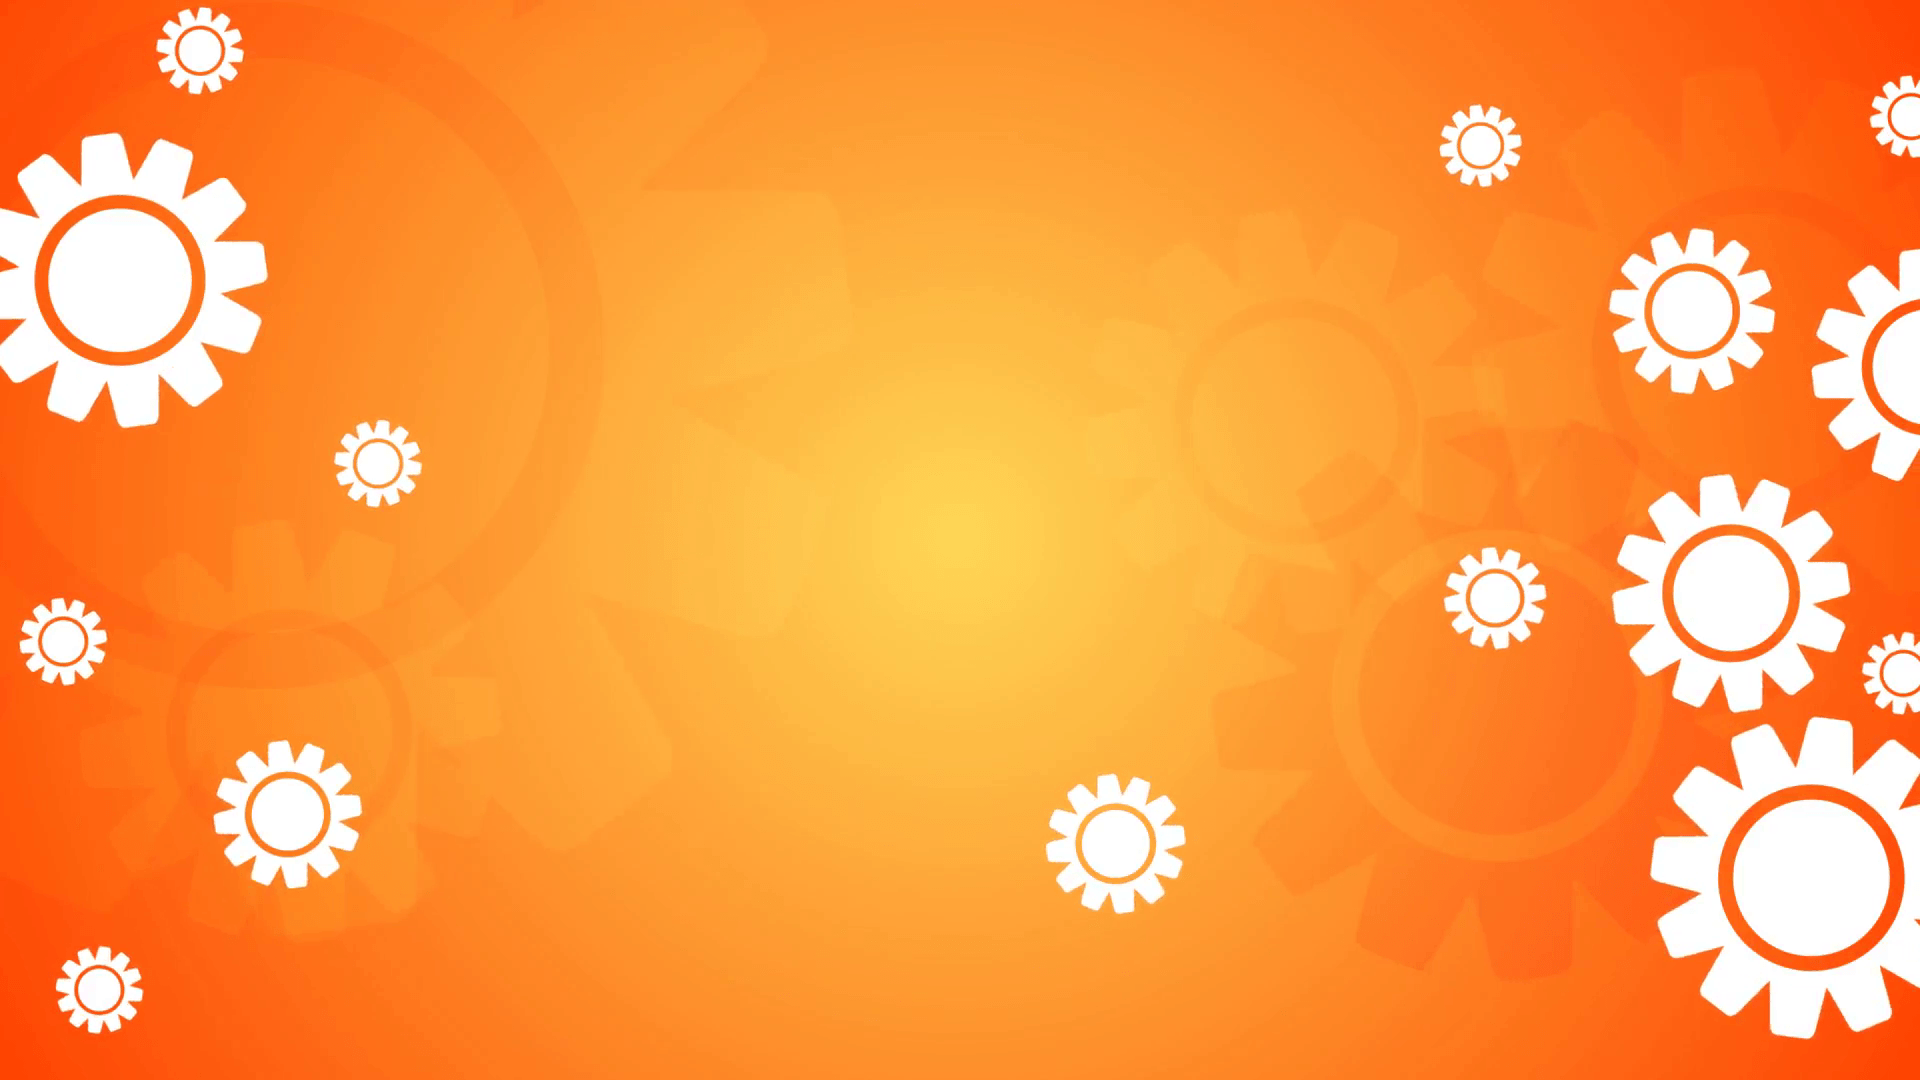 Bright orange background with gears icons. Seamless loop design